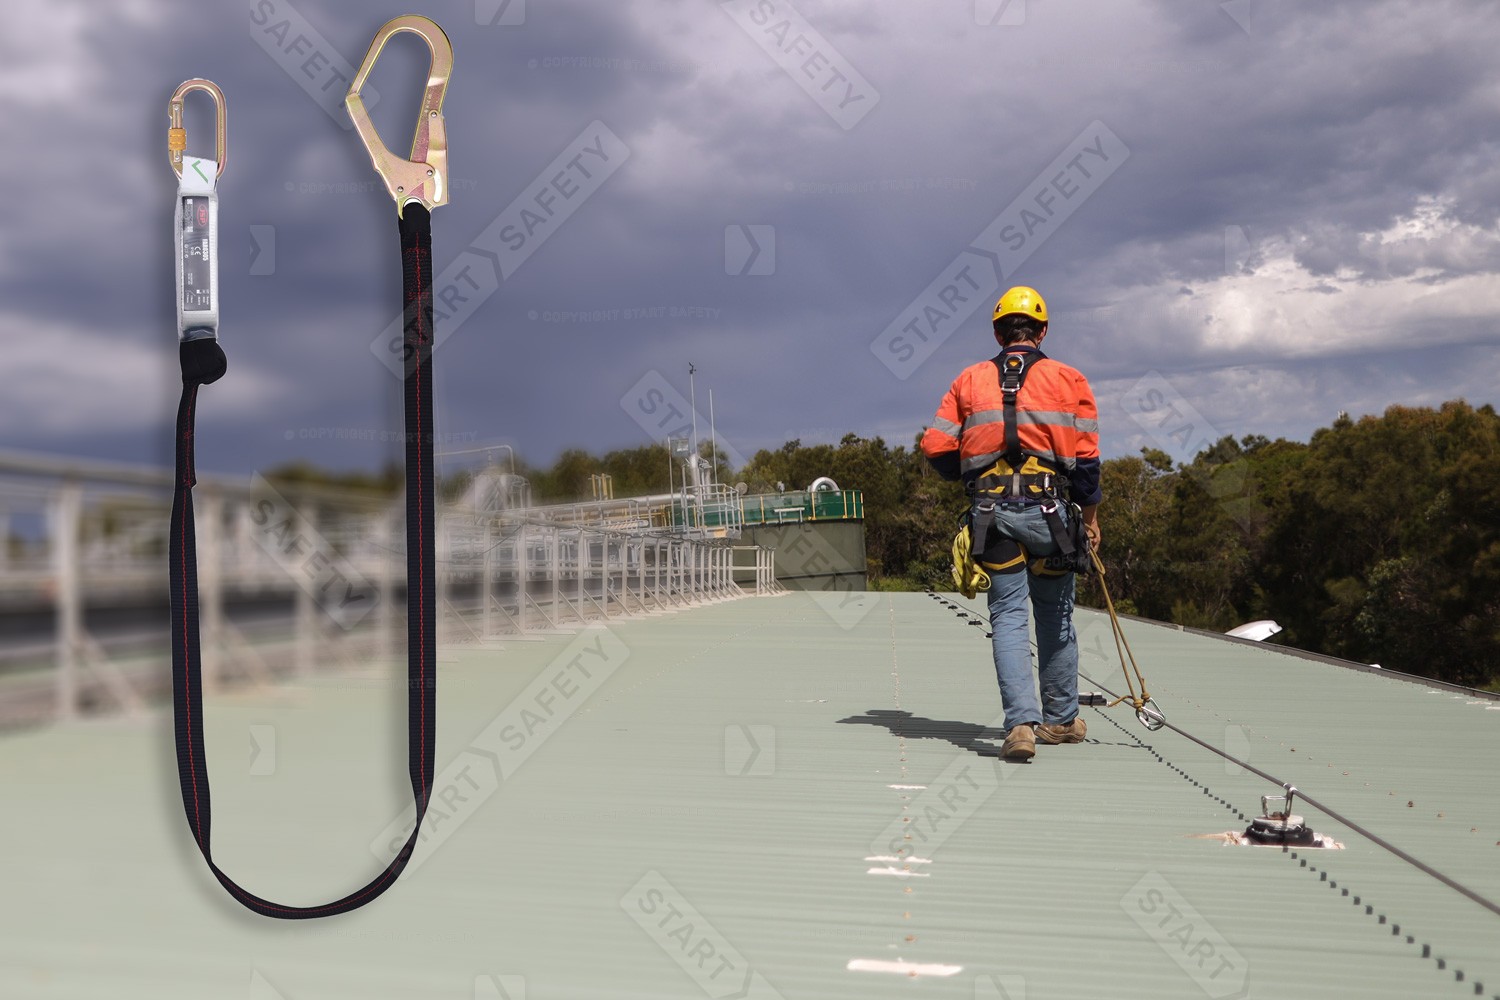 2m Spartan Fall Arrest Lanyard With Scaffolding Hook For Working At Height